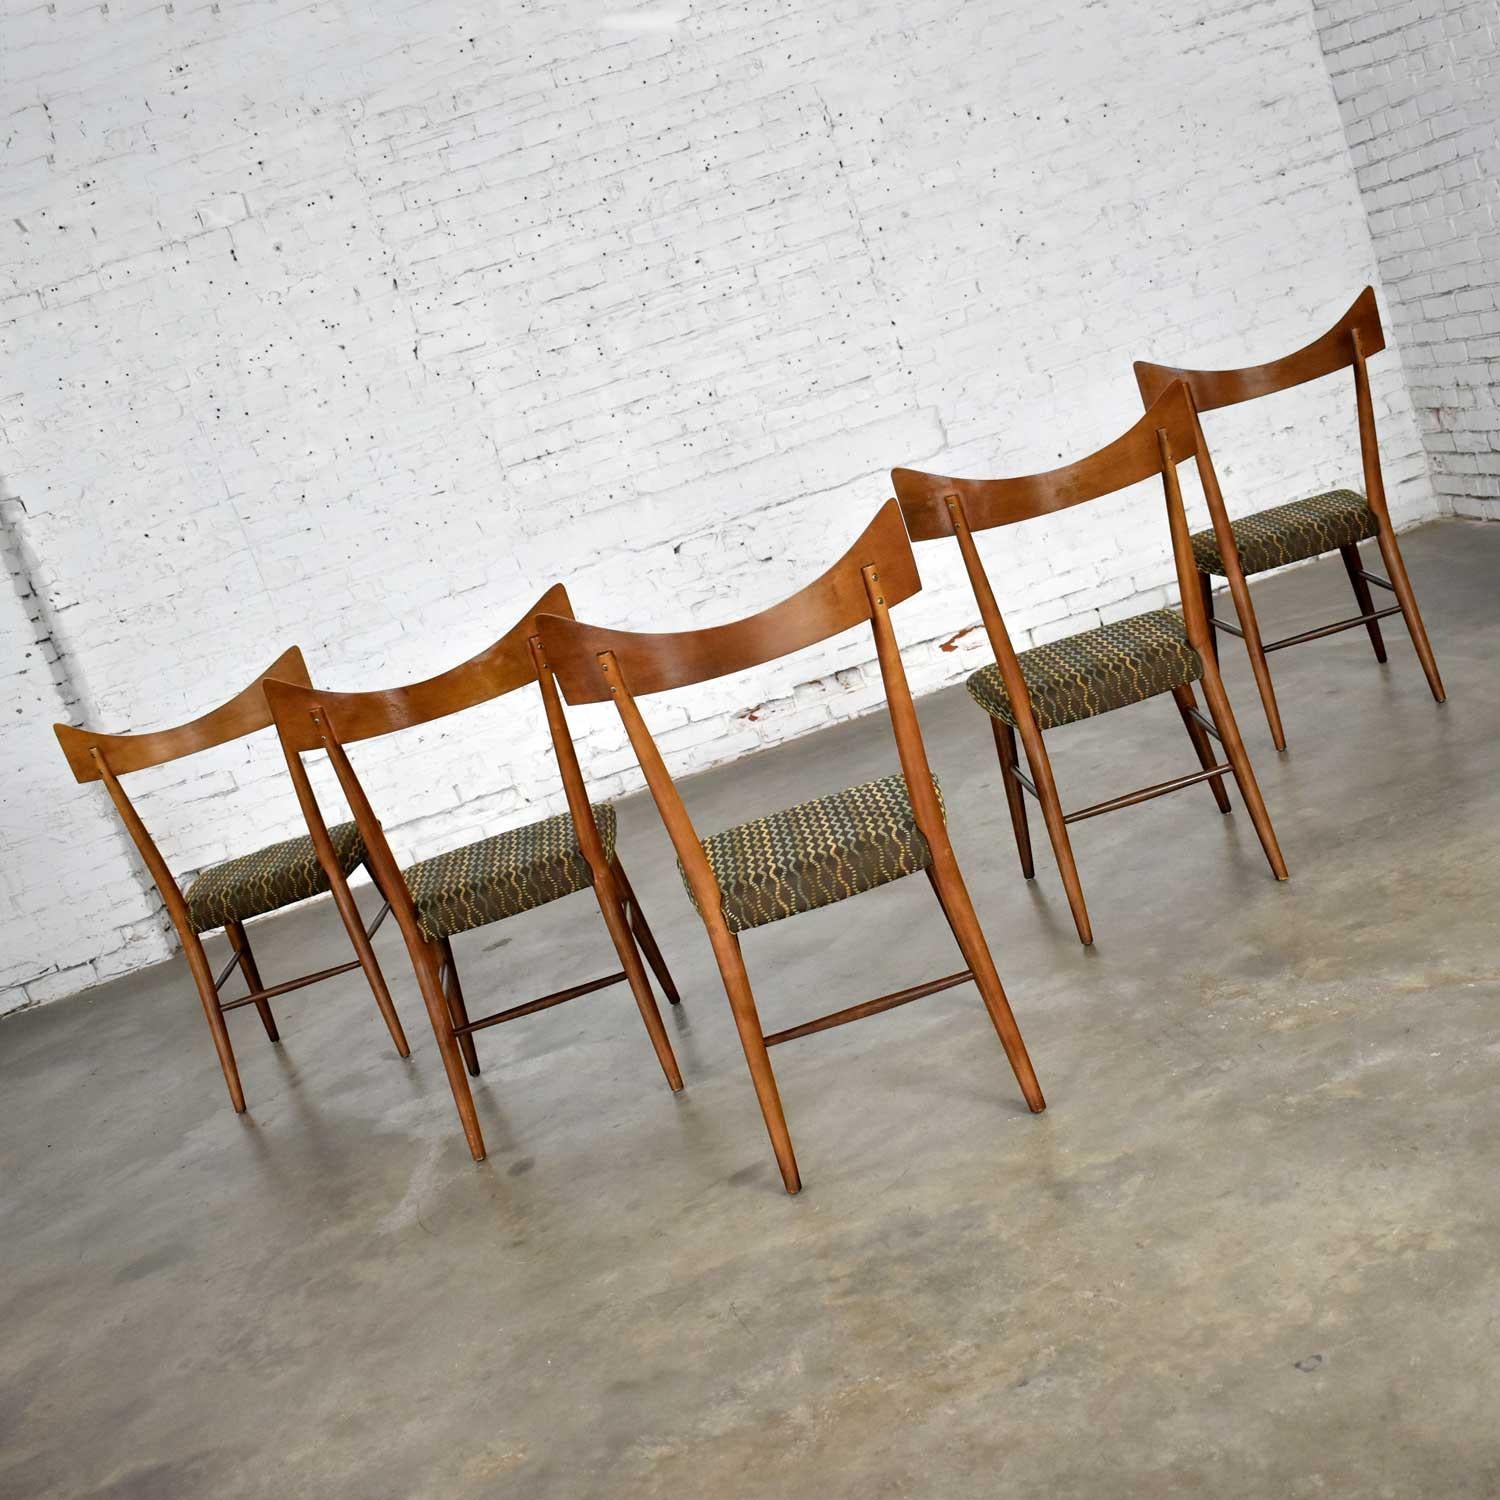 Fabulous set of five Mid-Century Modern Planner Group style #1534 dining chairs by Paul McCobb for Winchendon. Comprised of a dark walnut finished maple. They have been newly upholstered at some point in their recent past in a brown background